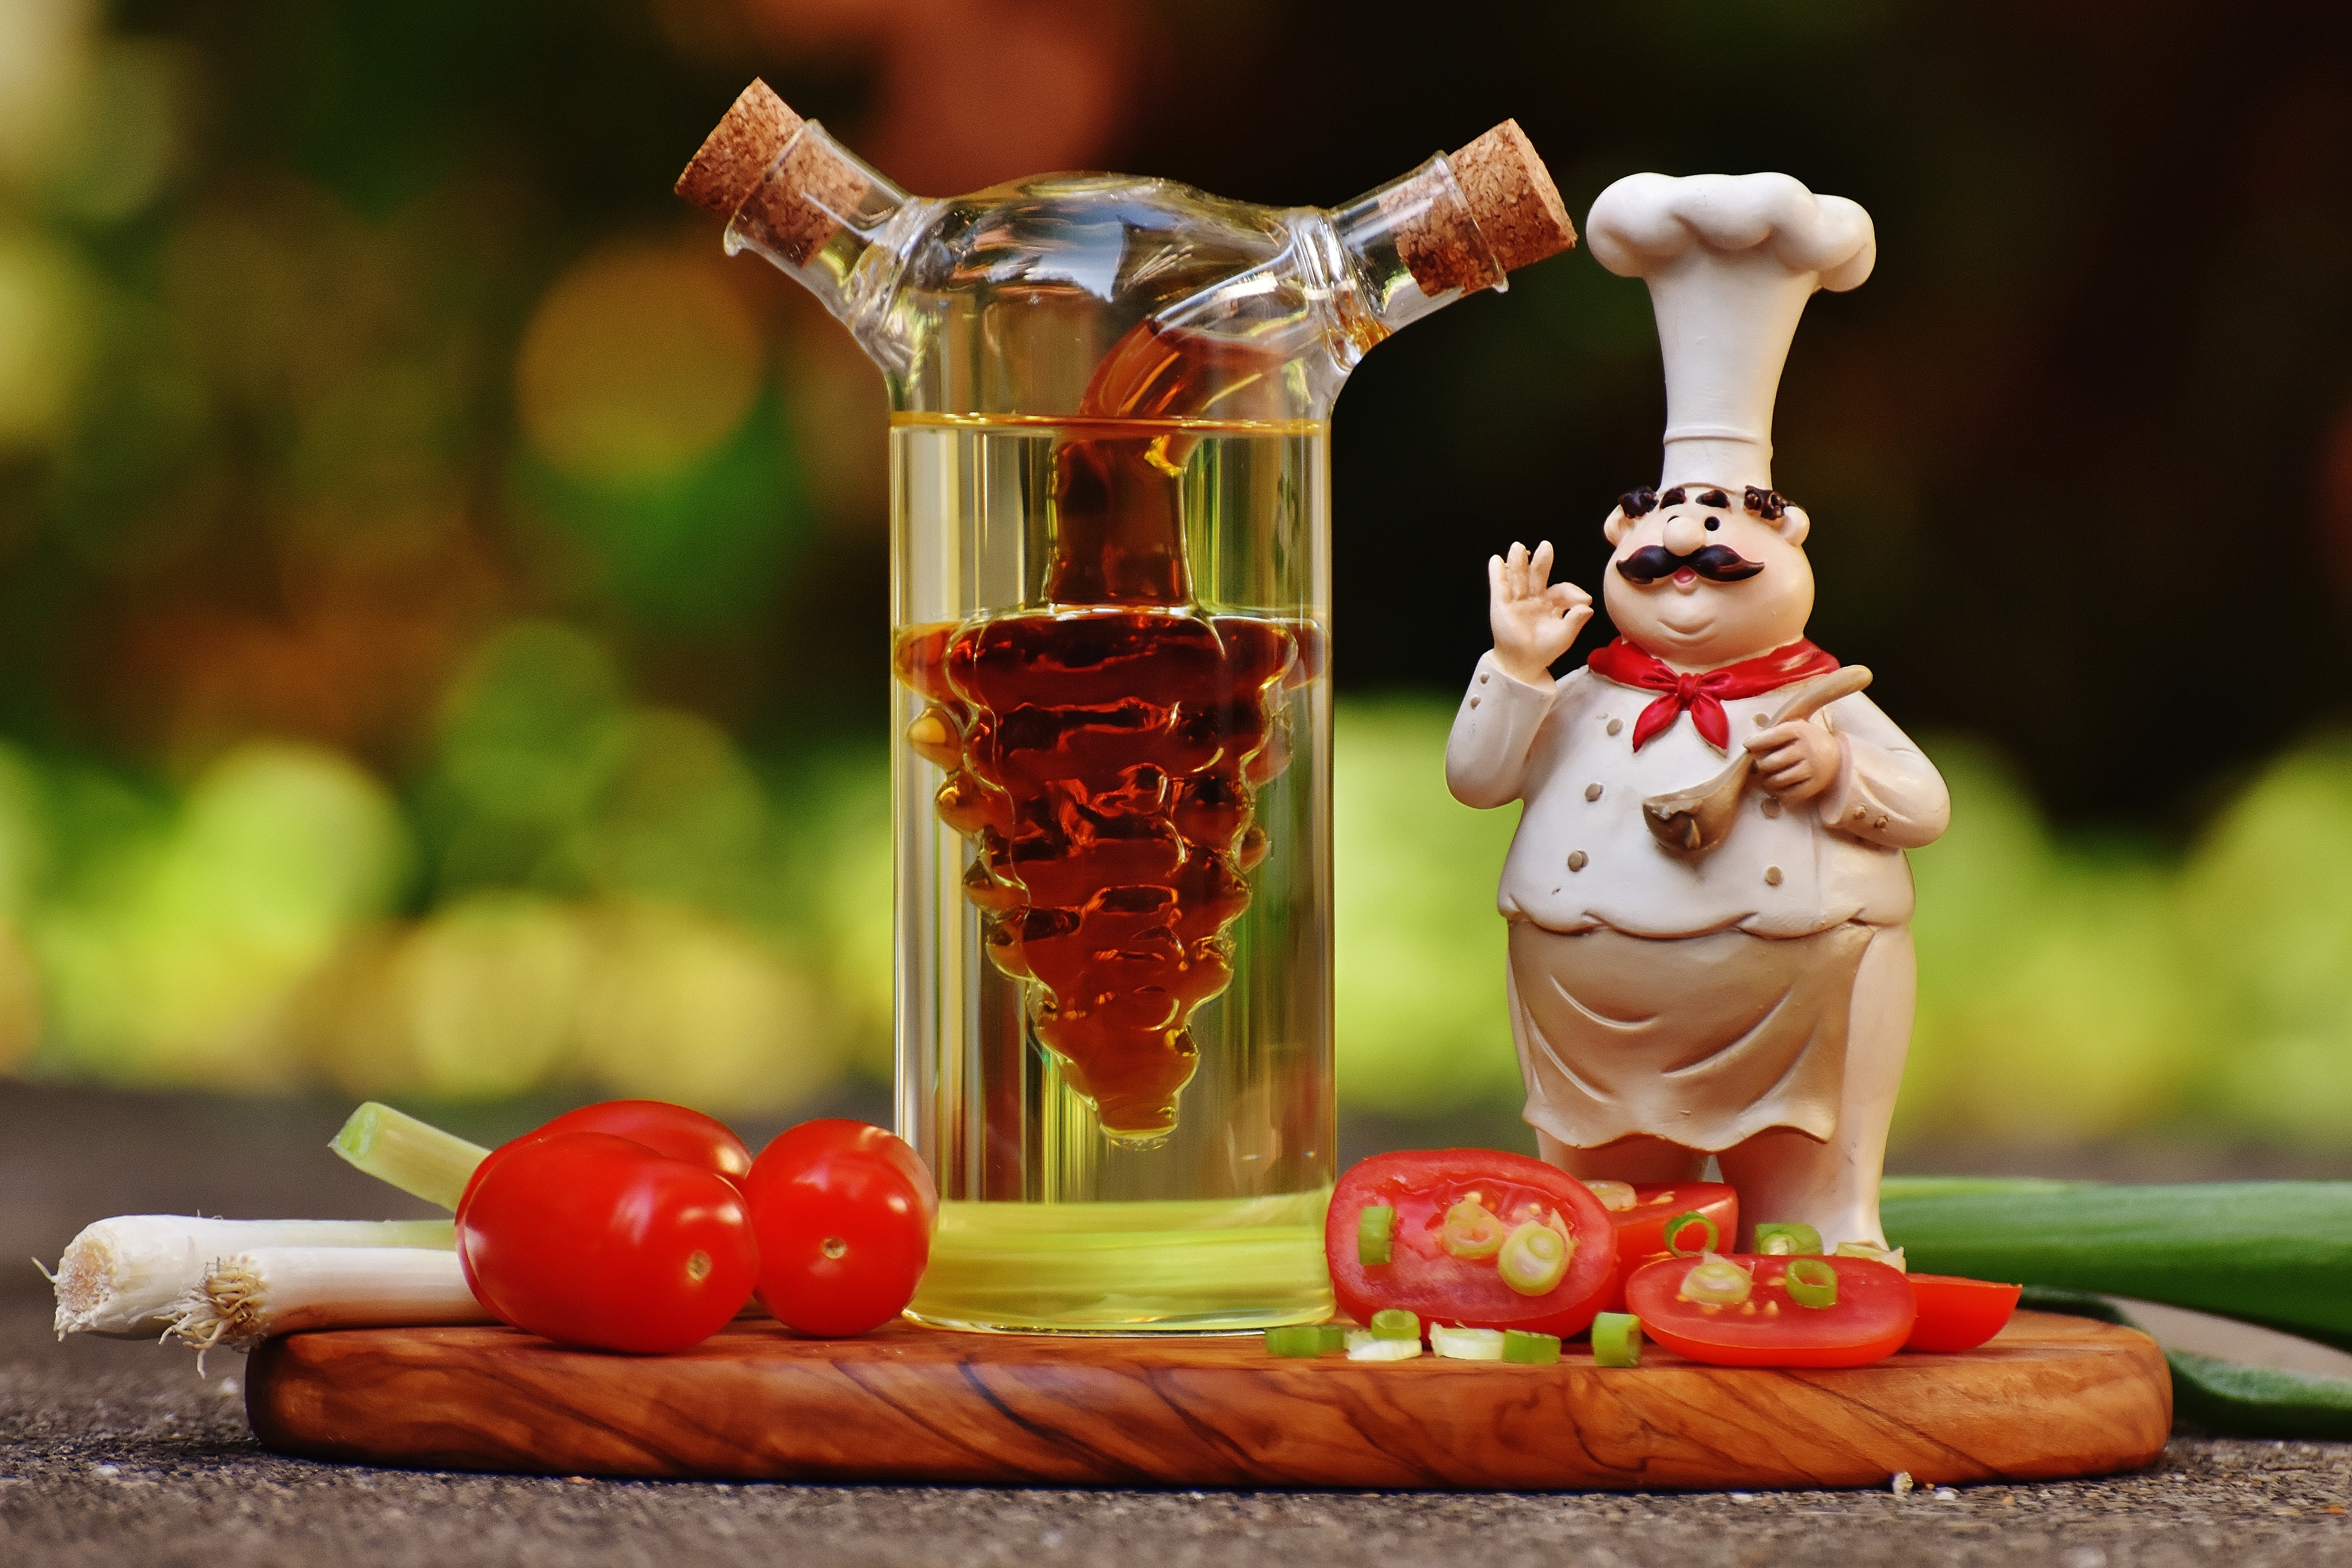 Chef figurine beside clear glass bottle and tomatoes photo